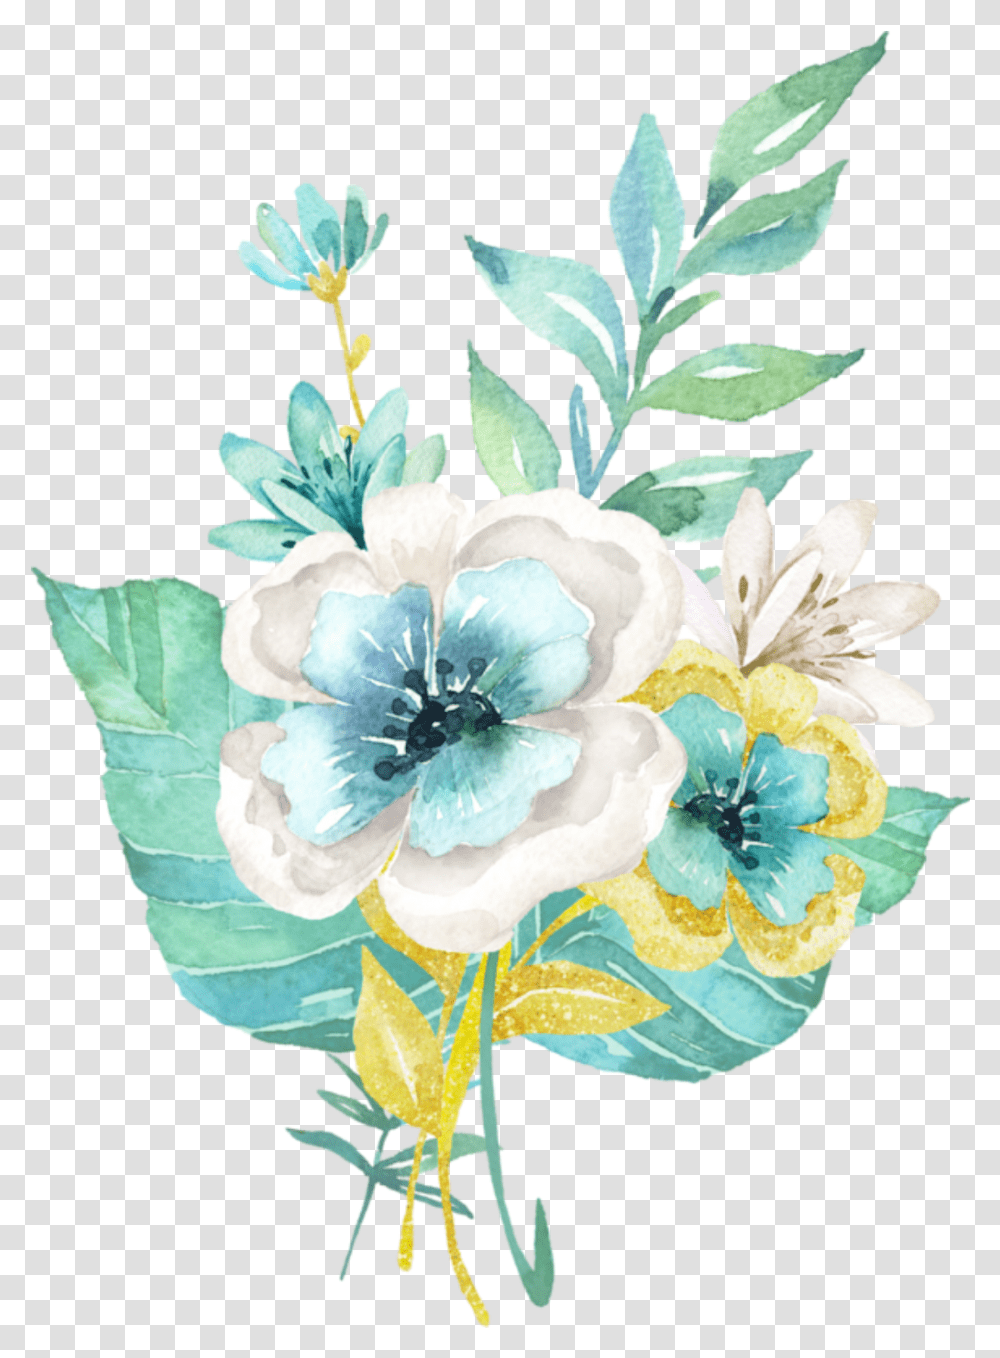 Ftestickers Watercolor Flowers Teal Blue Green Watercolor Flowers, Plant, Jewelry, Accessories, Brooch Transparent Png